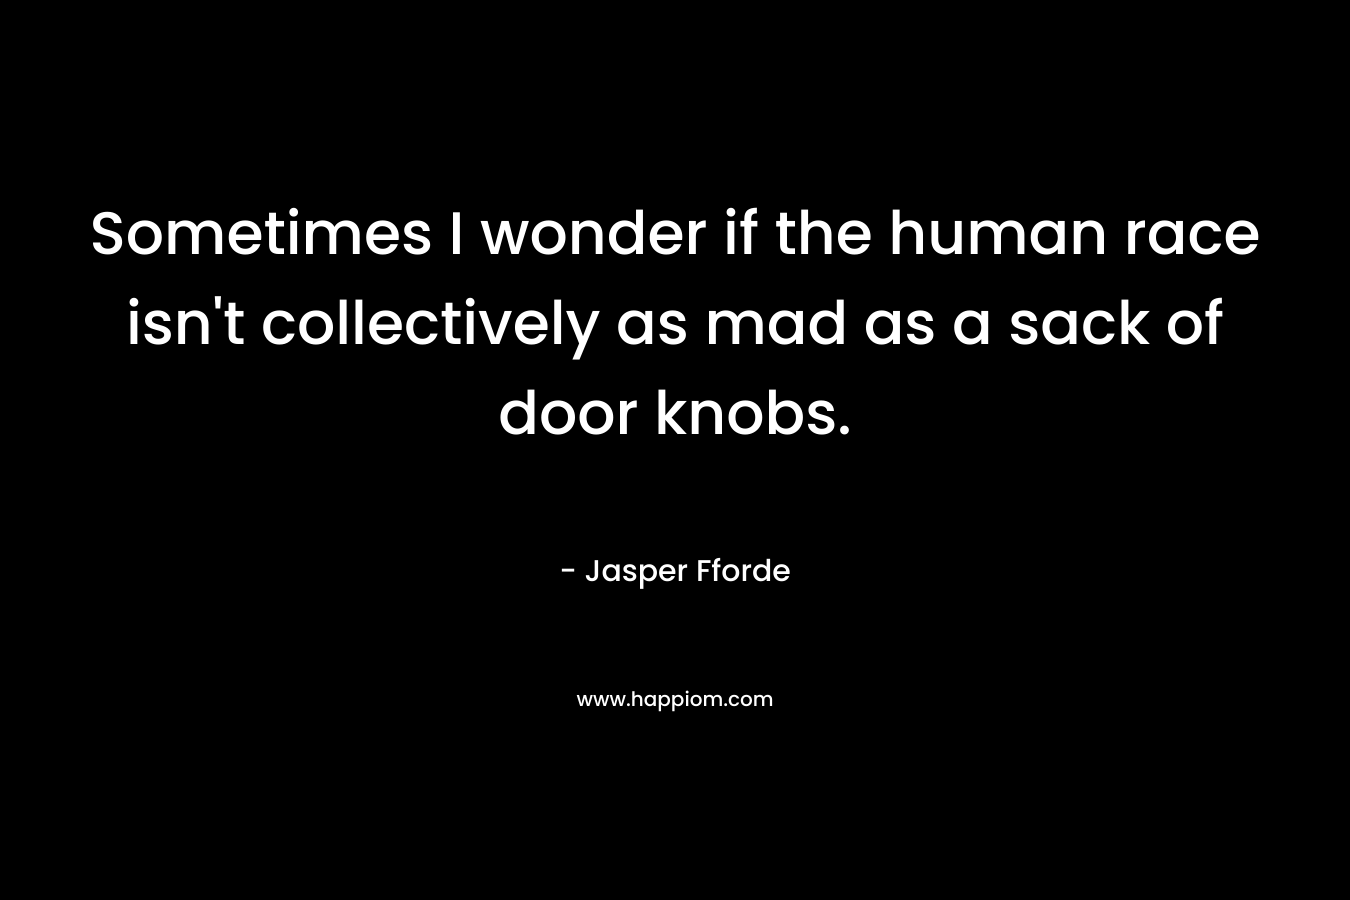 Sometimes I wonder if the human race isn’t collectively as mad as a sack of door knobs. – Jasper Fforde